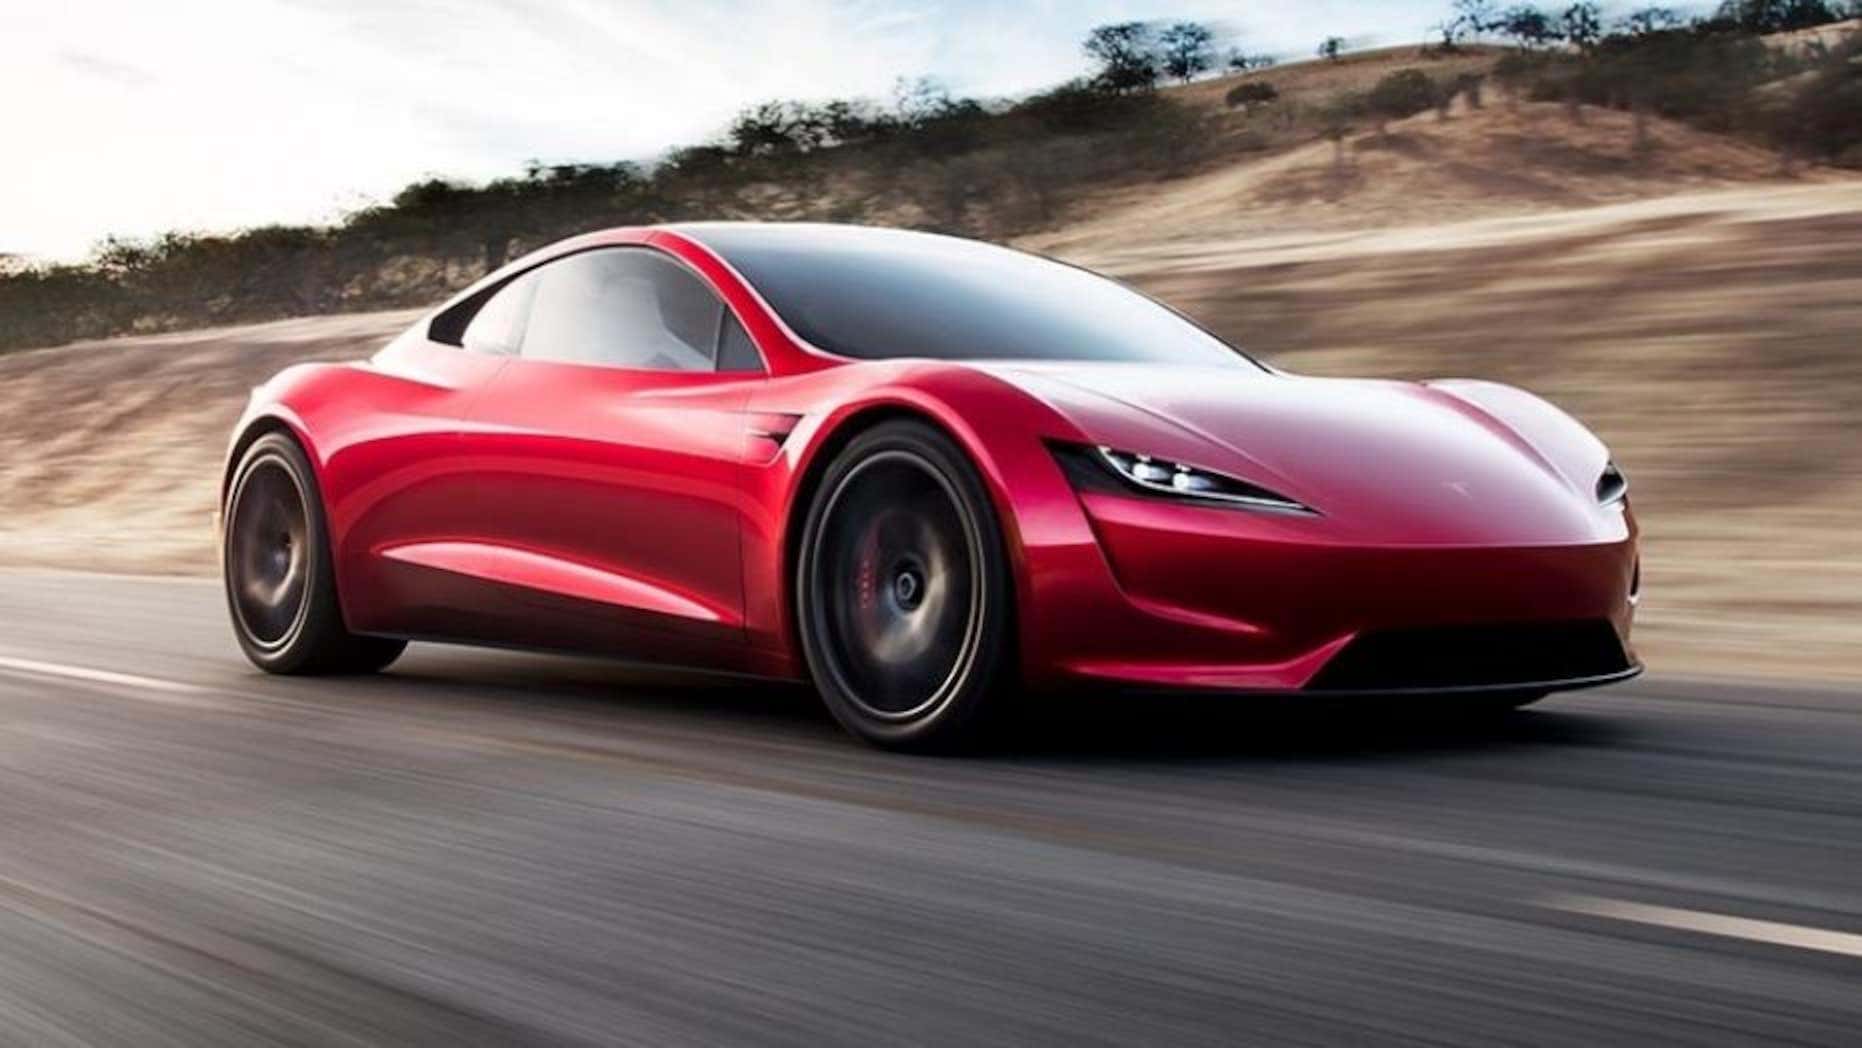 The 250 mph Tesla Roadster delayed to 2022, along with the large Cybertruck implementation